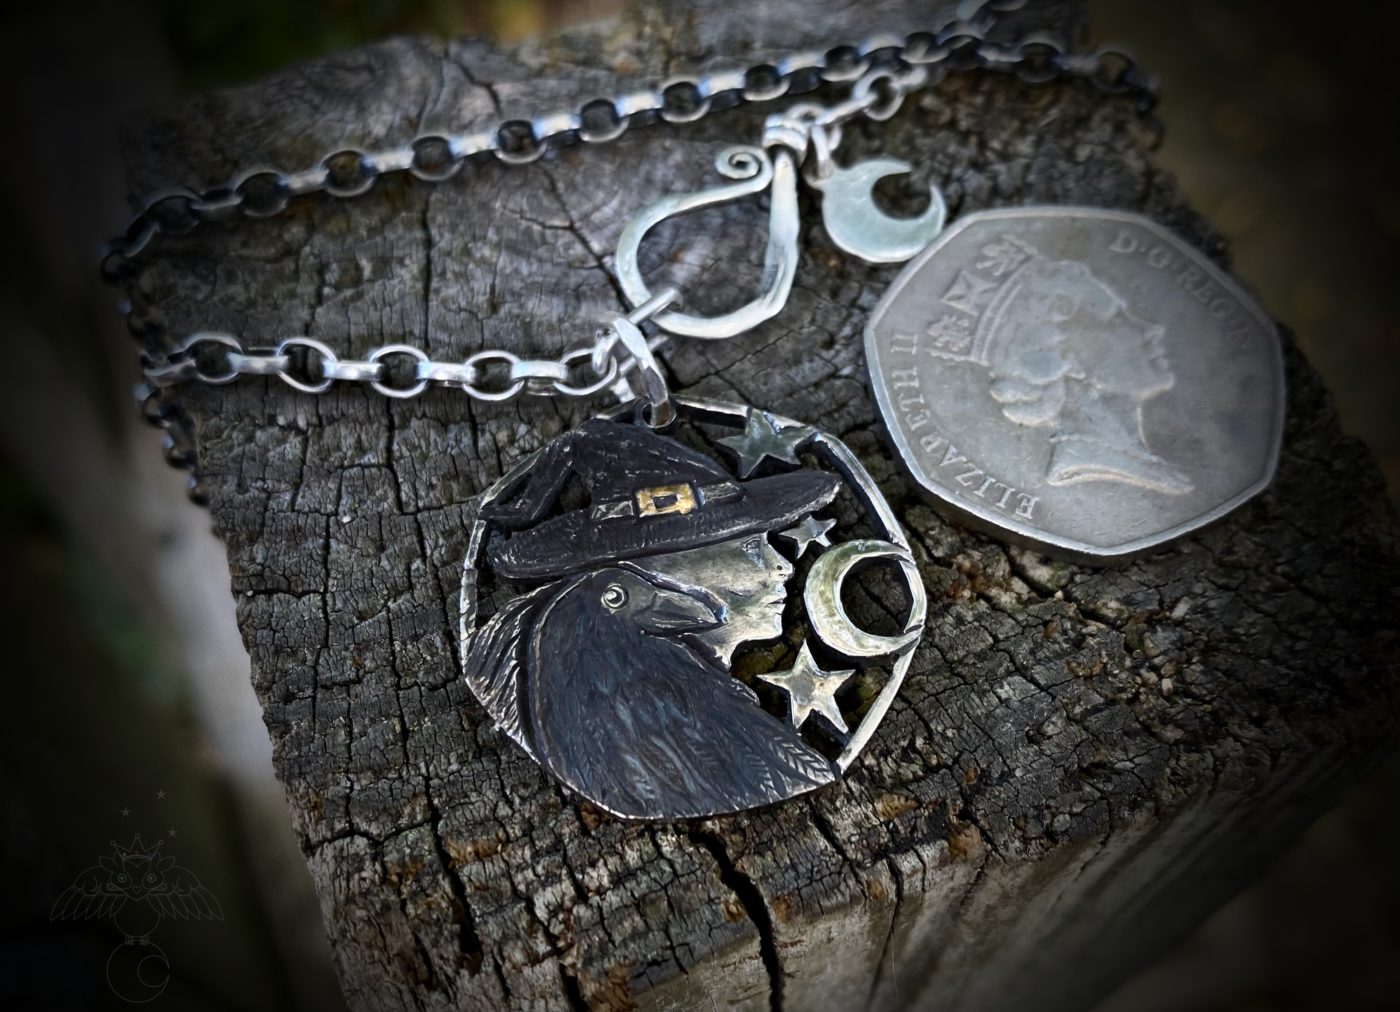 Handmade and recycled coin raven-queen pendant necklace